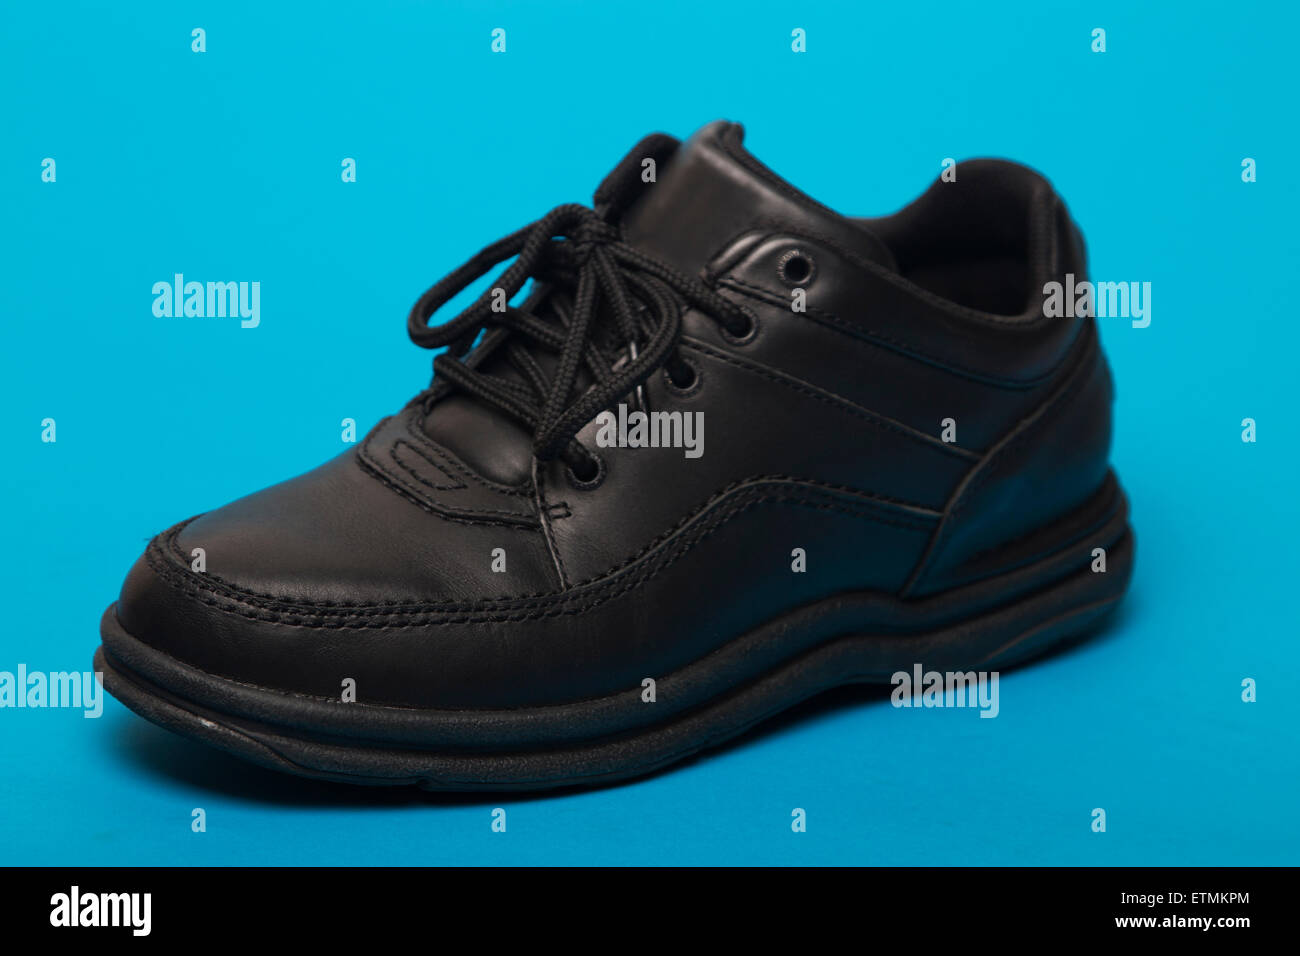 Close up view of a black shoe isolated on a blue background. Stock Photo